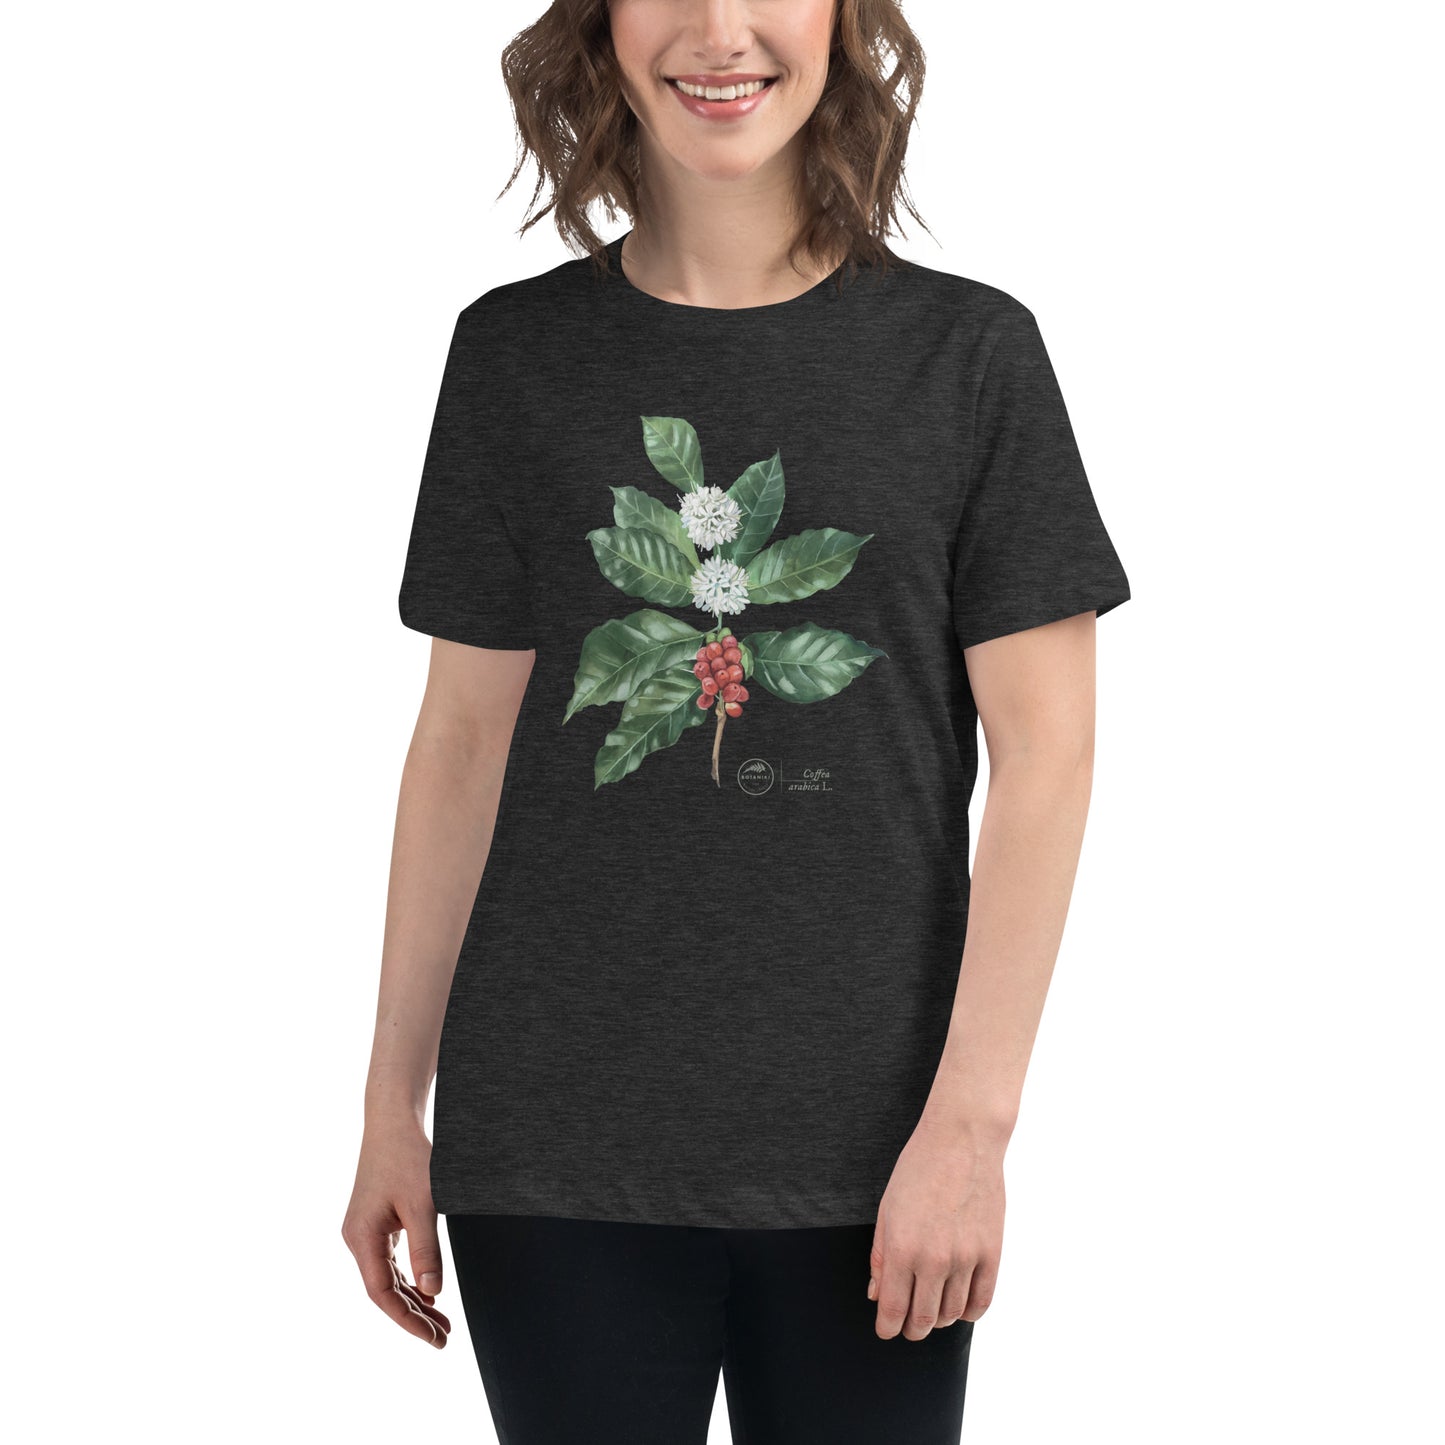 Women's Relaxed T-Shirt - Coffee tree